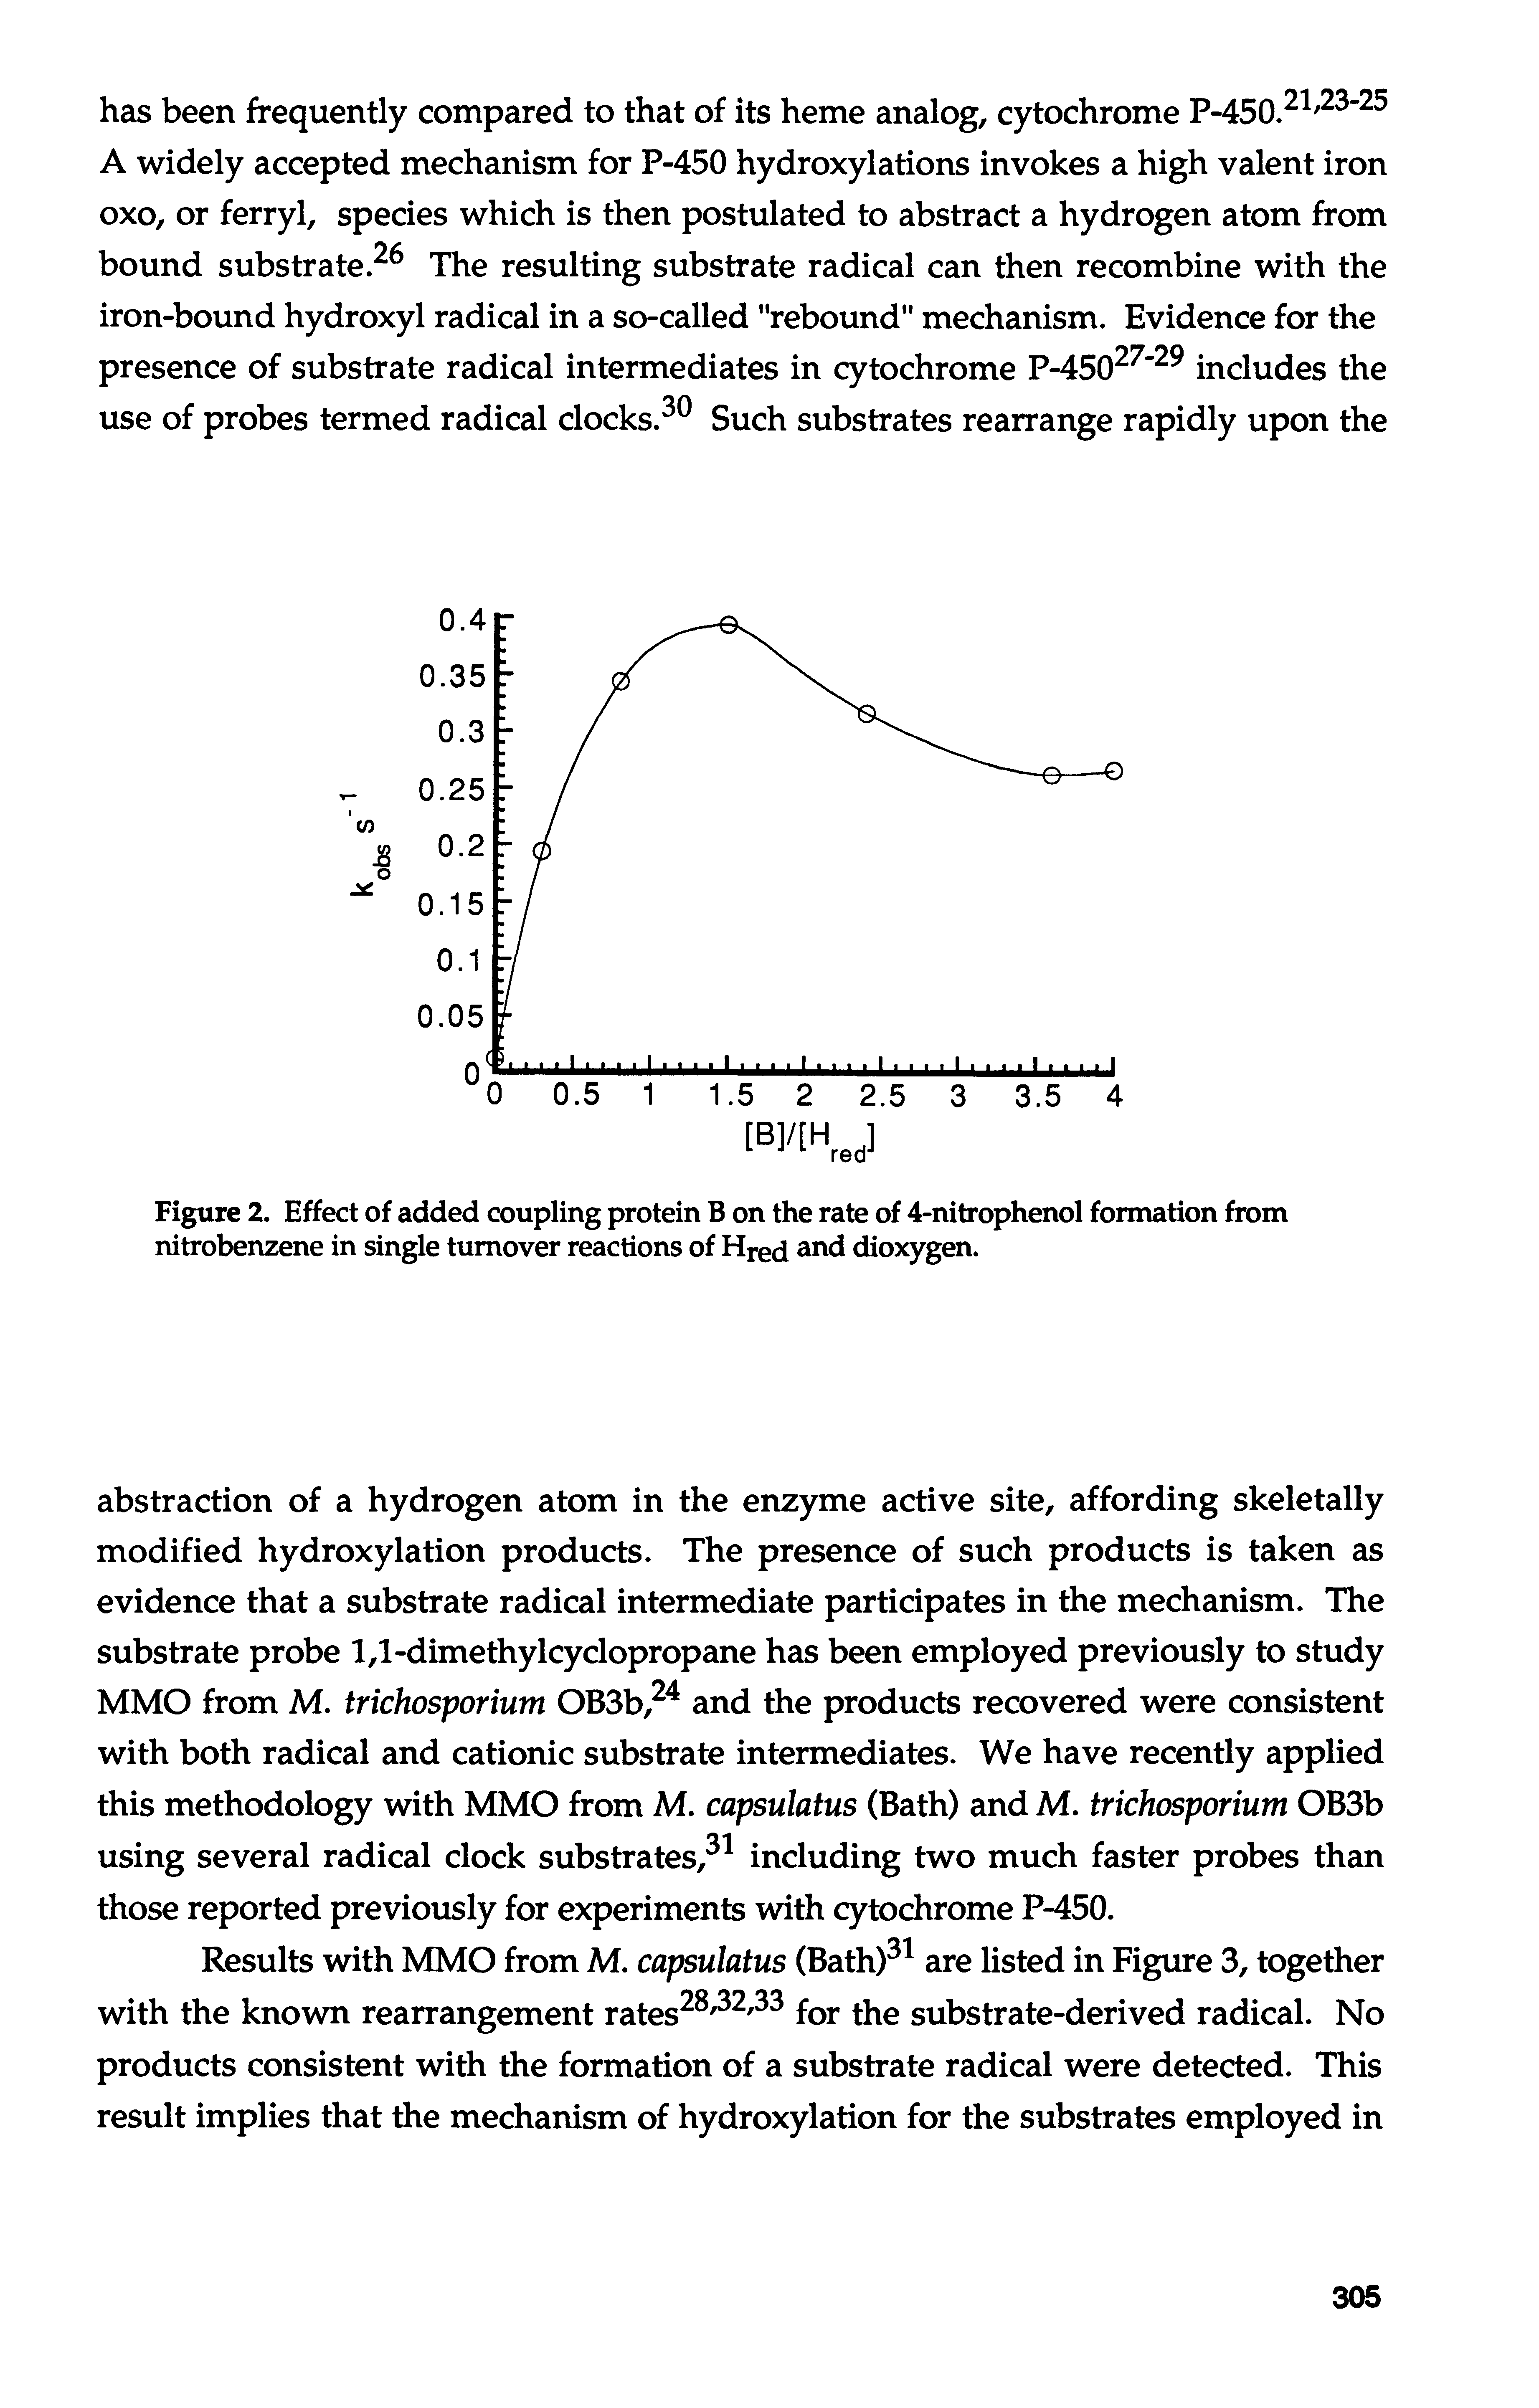 Figure 2. Effect of added coupling protein B on the rate of 4-nitrophenol formation from nitrobenzene in single turnover reactions of Hred dioxygen.